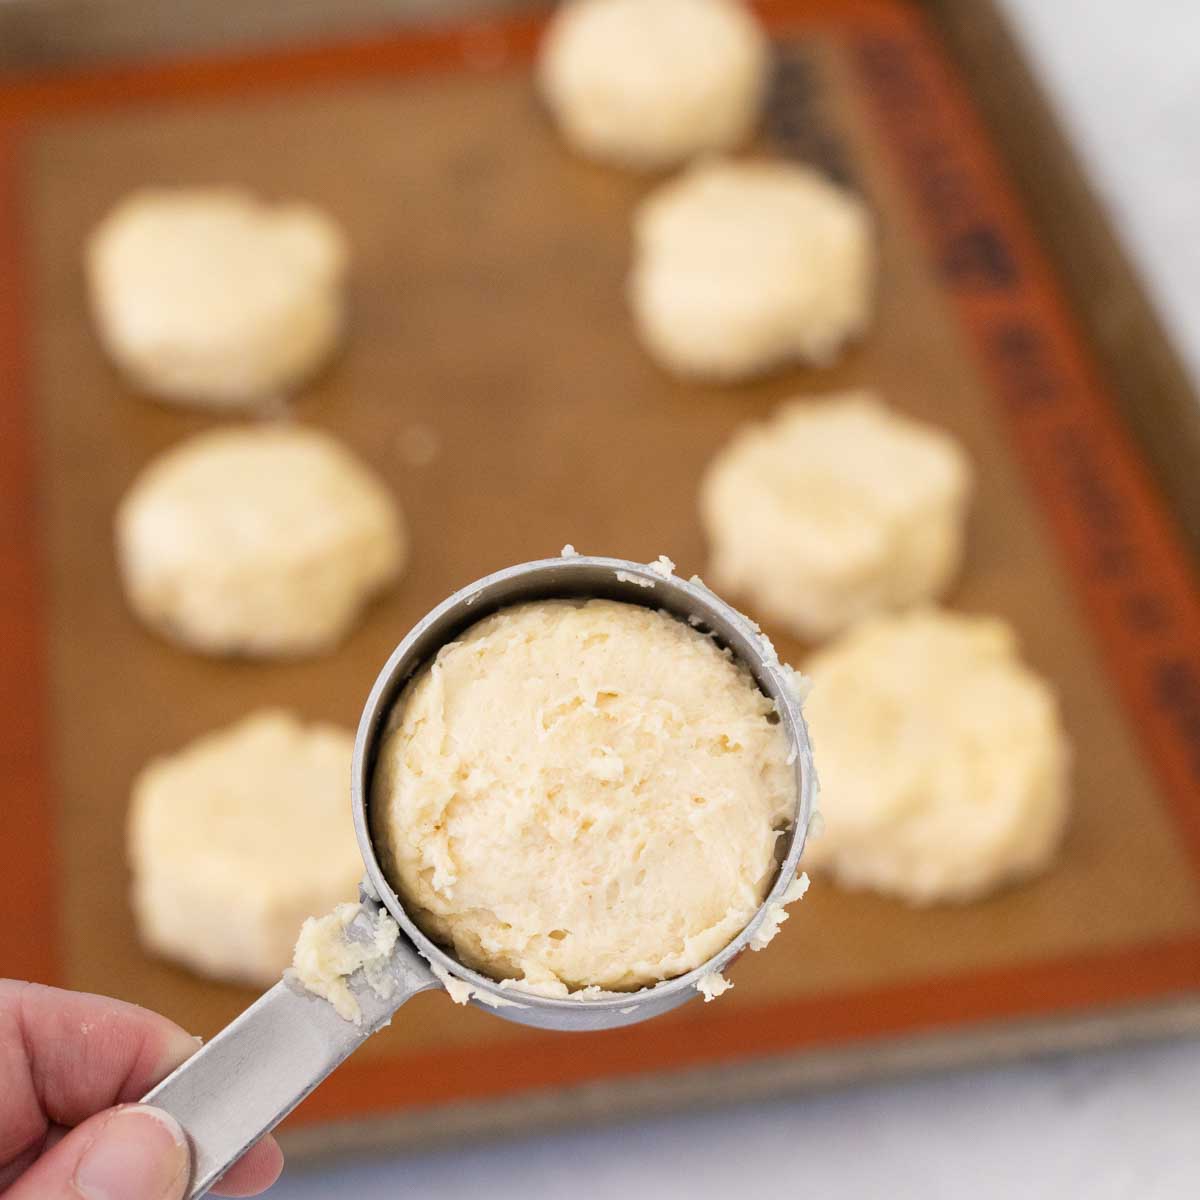 The measuring cup has been filled with dough to portion and shape the shortcakes.